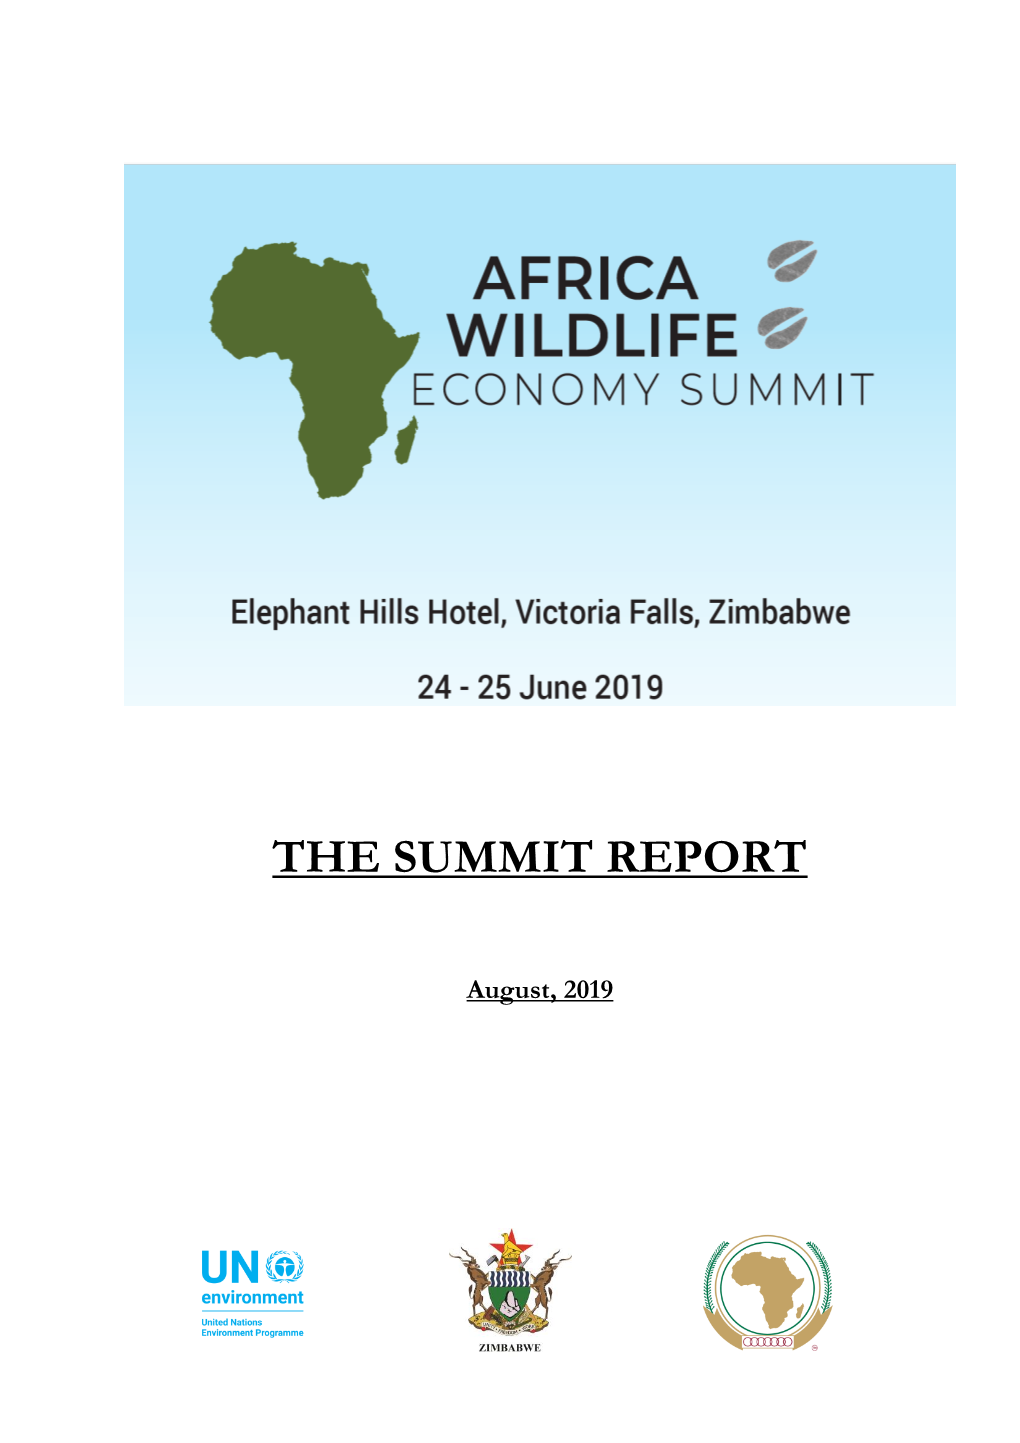 The Summit Report